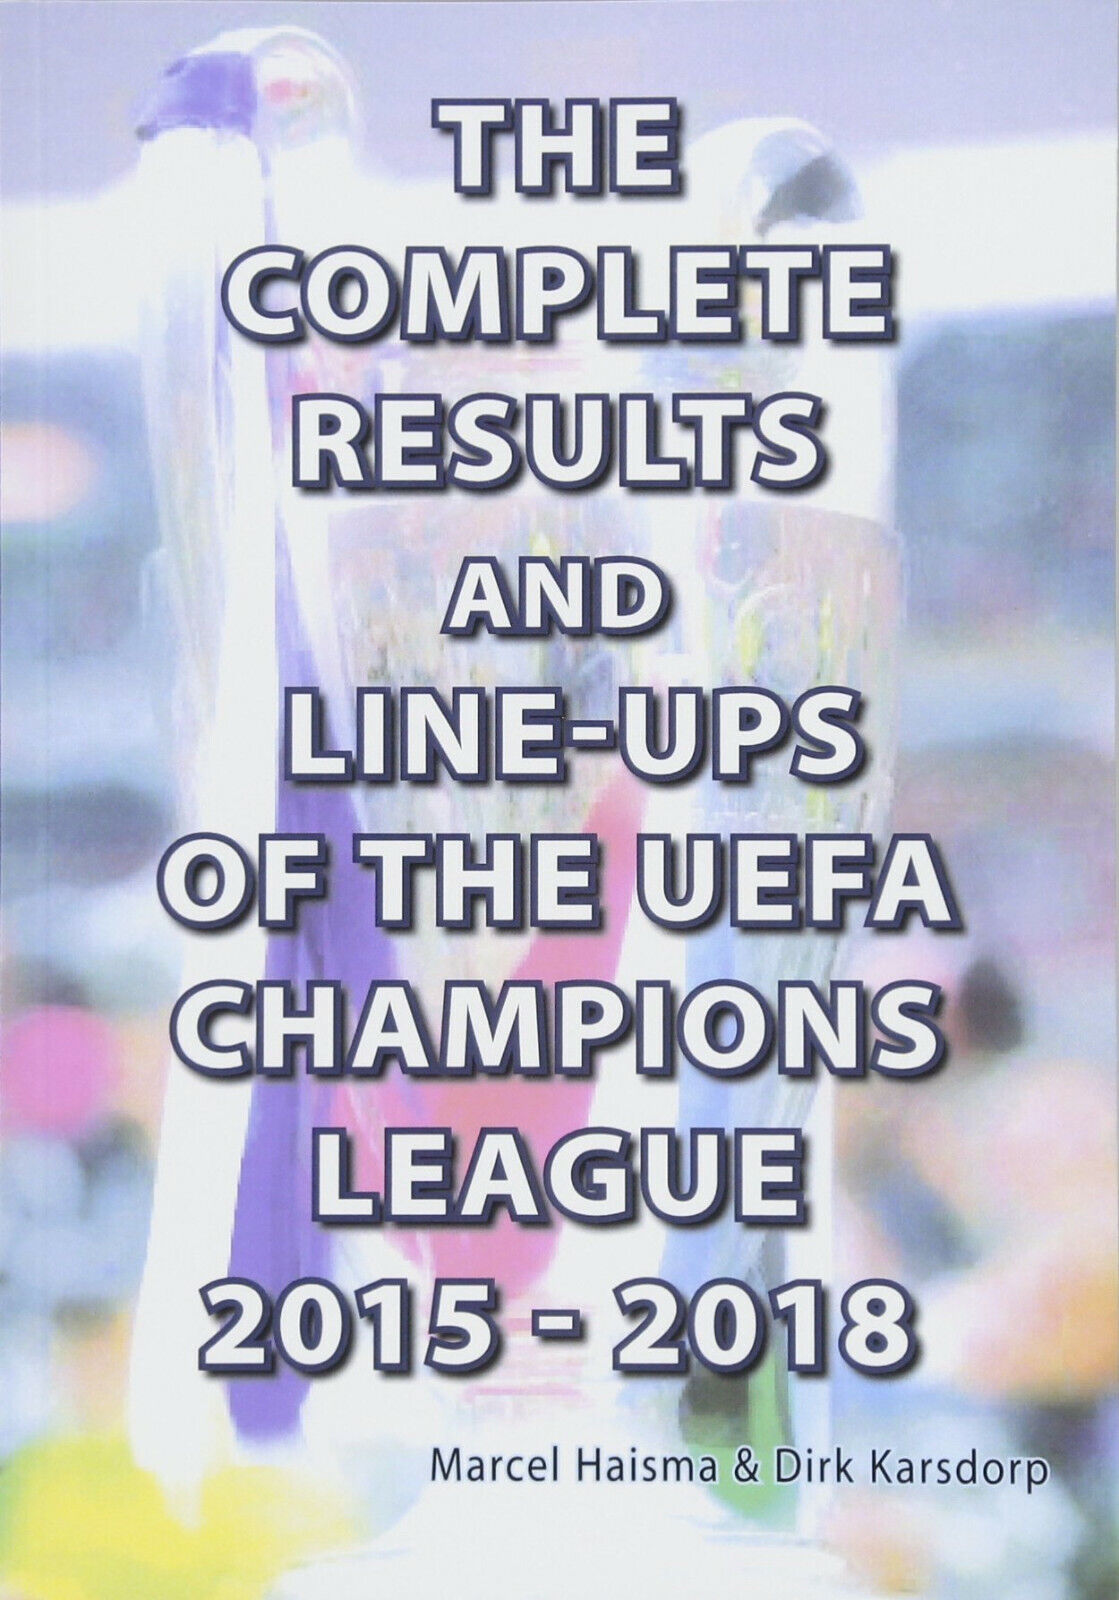 The Complete Results & Line-ups of the UEFA Champions League 2015-2018 - 2018 libro usato